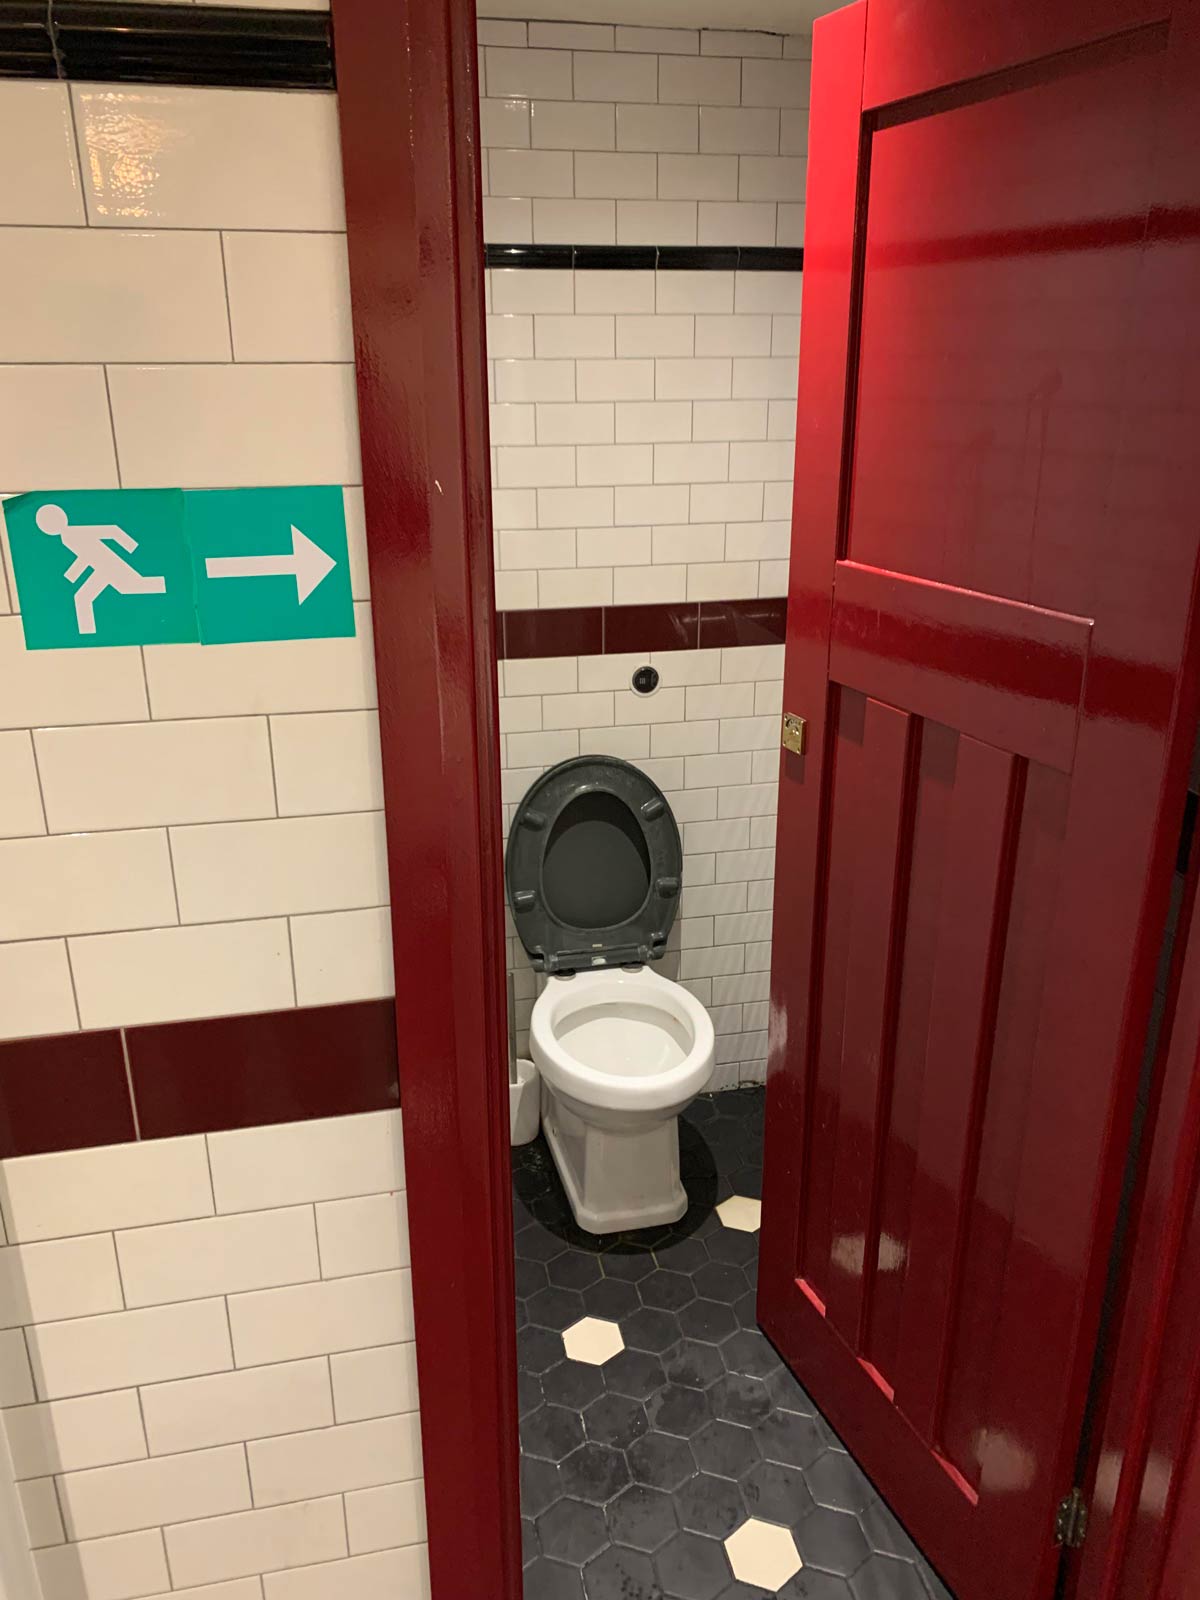 Where is the fire exit, the Ministry of Magic?